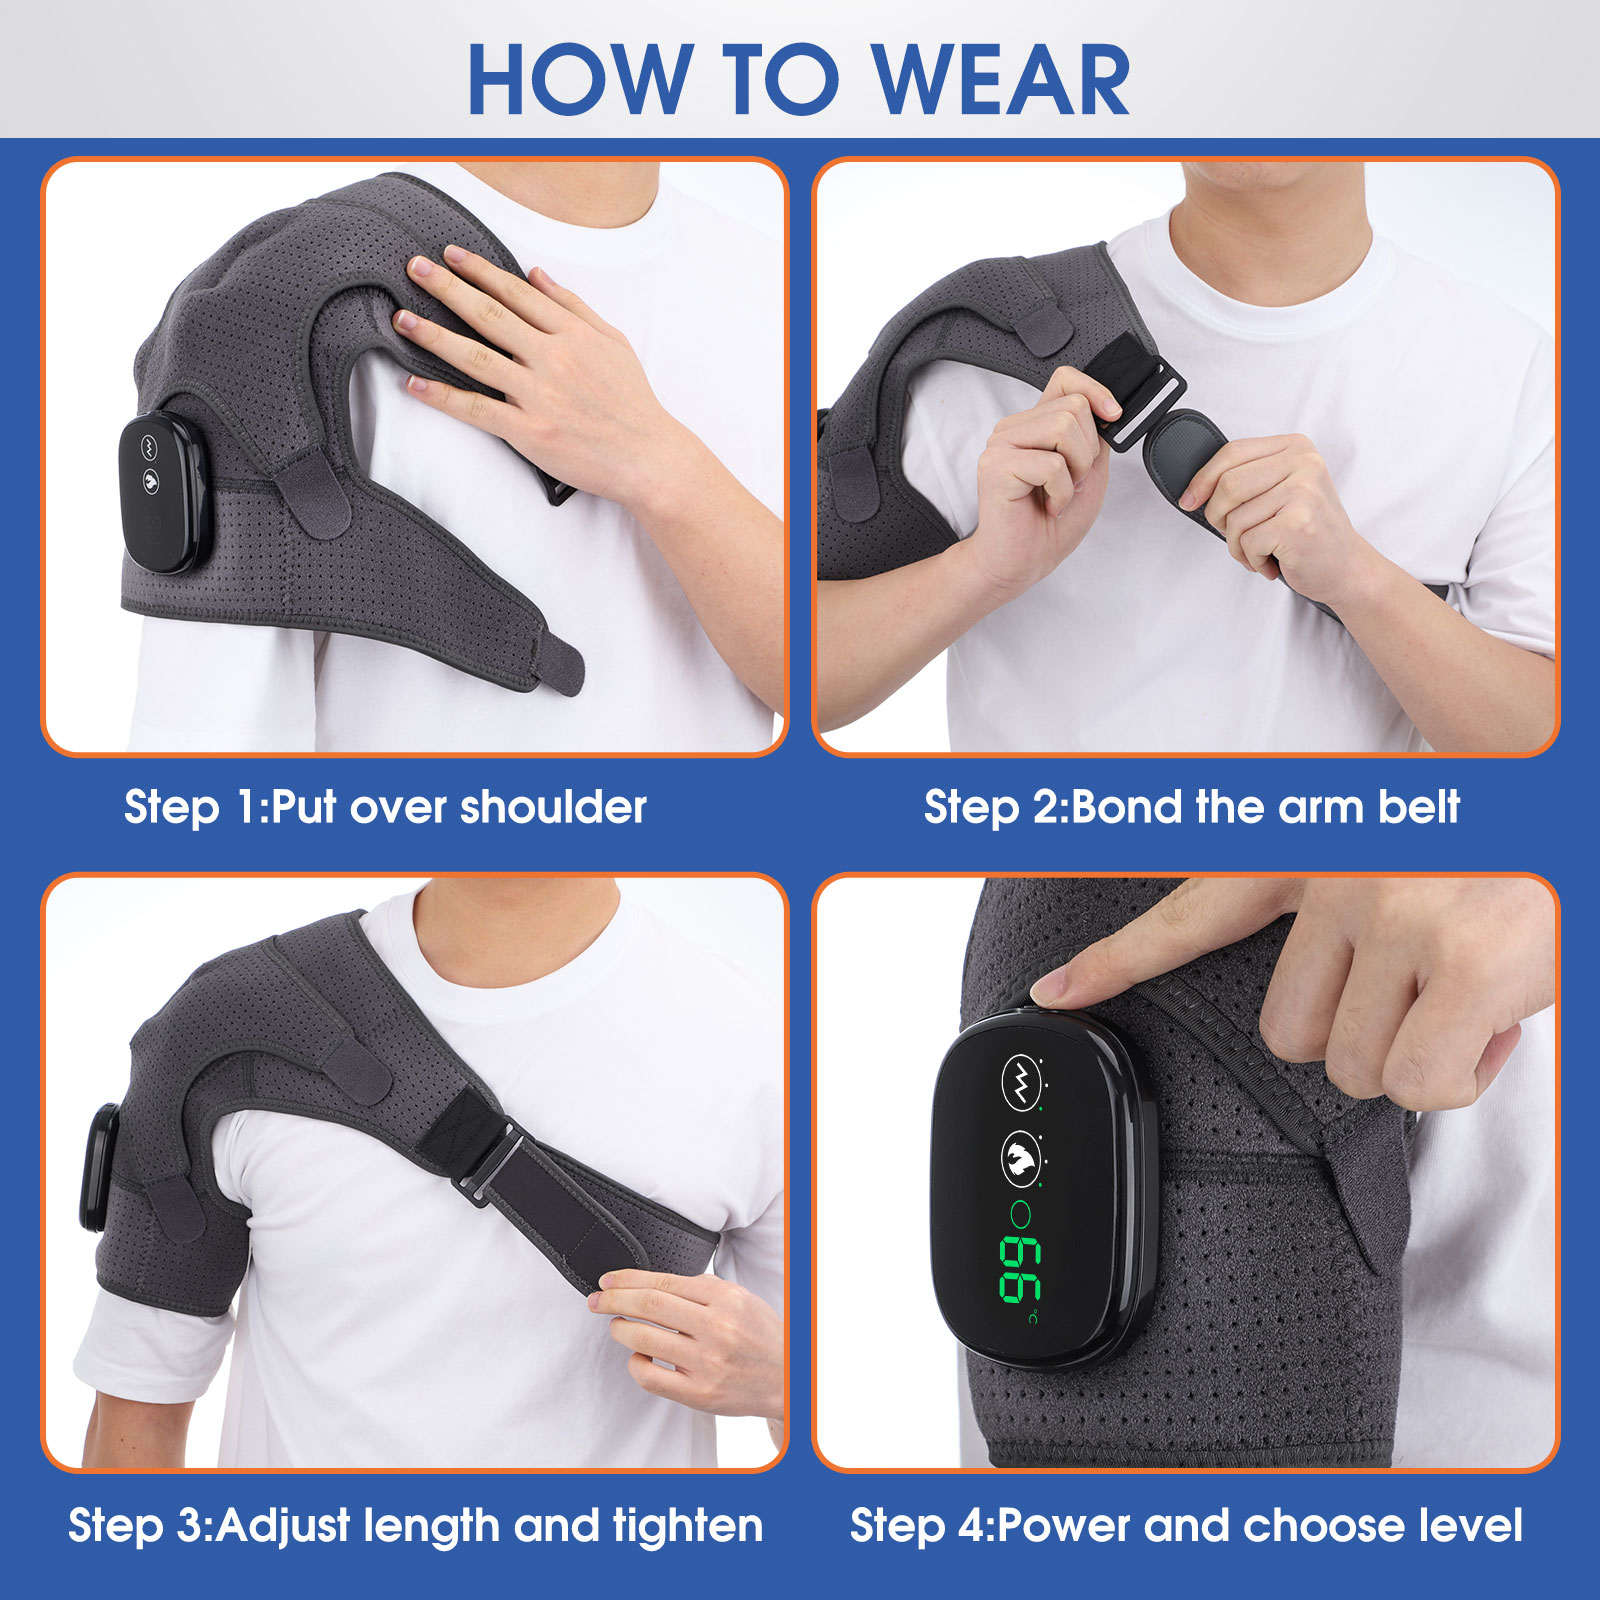 https://katycraft.com/wp-content/uploads/2023/03/Heating-Vibration-Massage-Electric-Shoulder-Brace-Support-Belt-Therapy-For-Arthritis-Joint-Injury-Pain-Relief-Rehabilitation-2.jpg